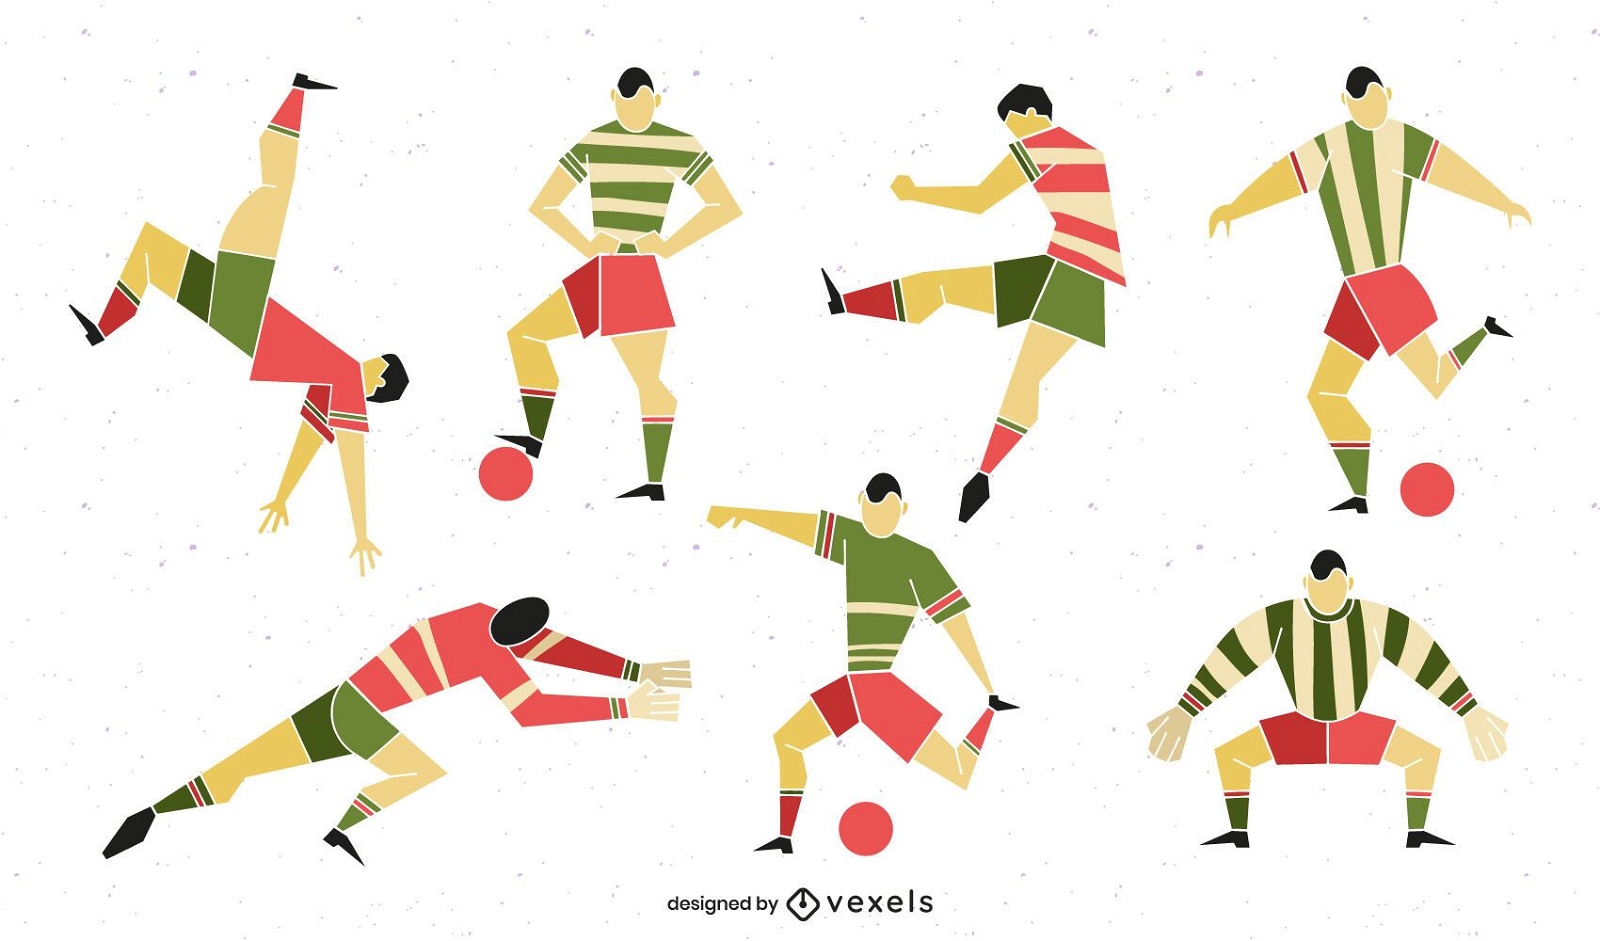 Geometric Style Football Player Pack